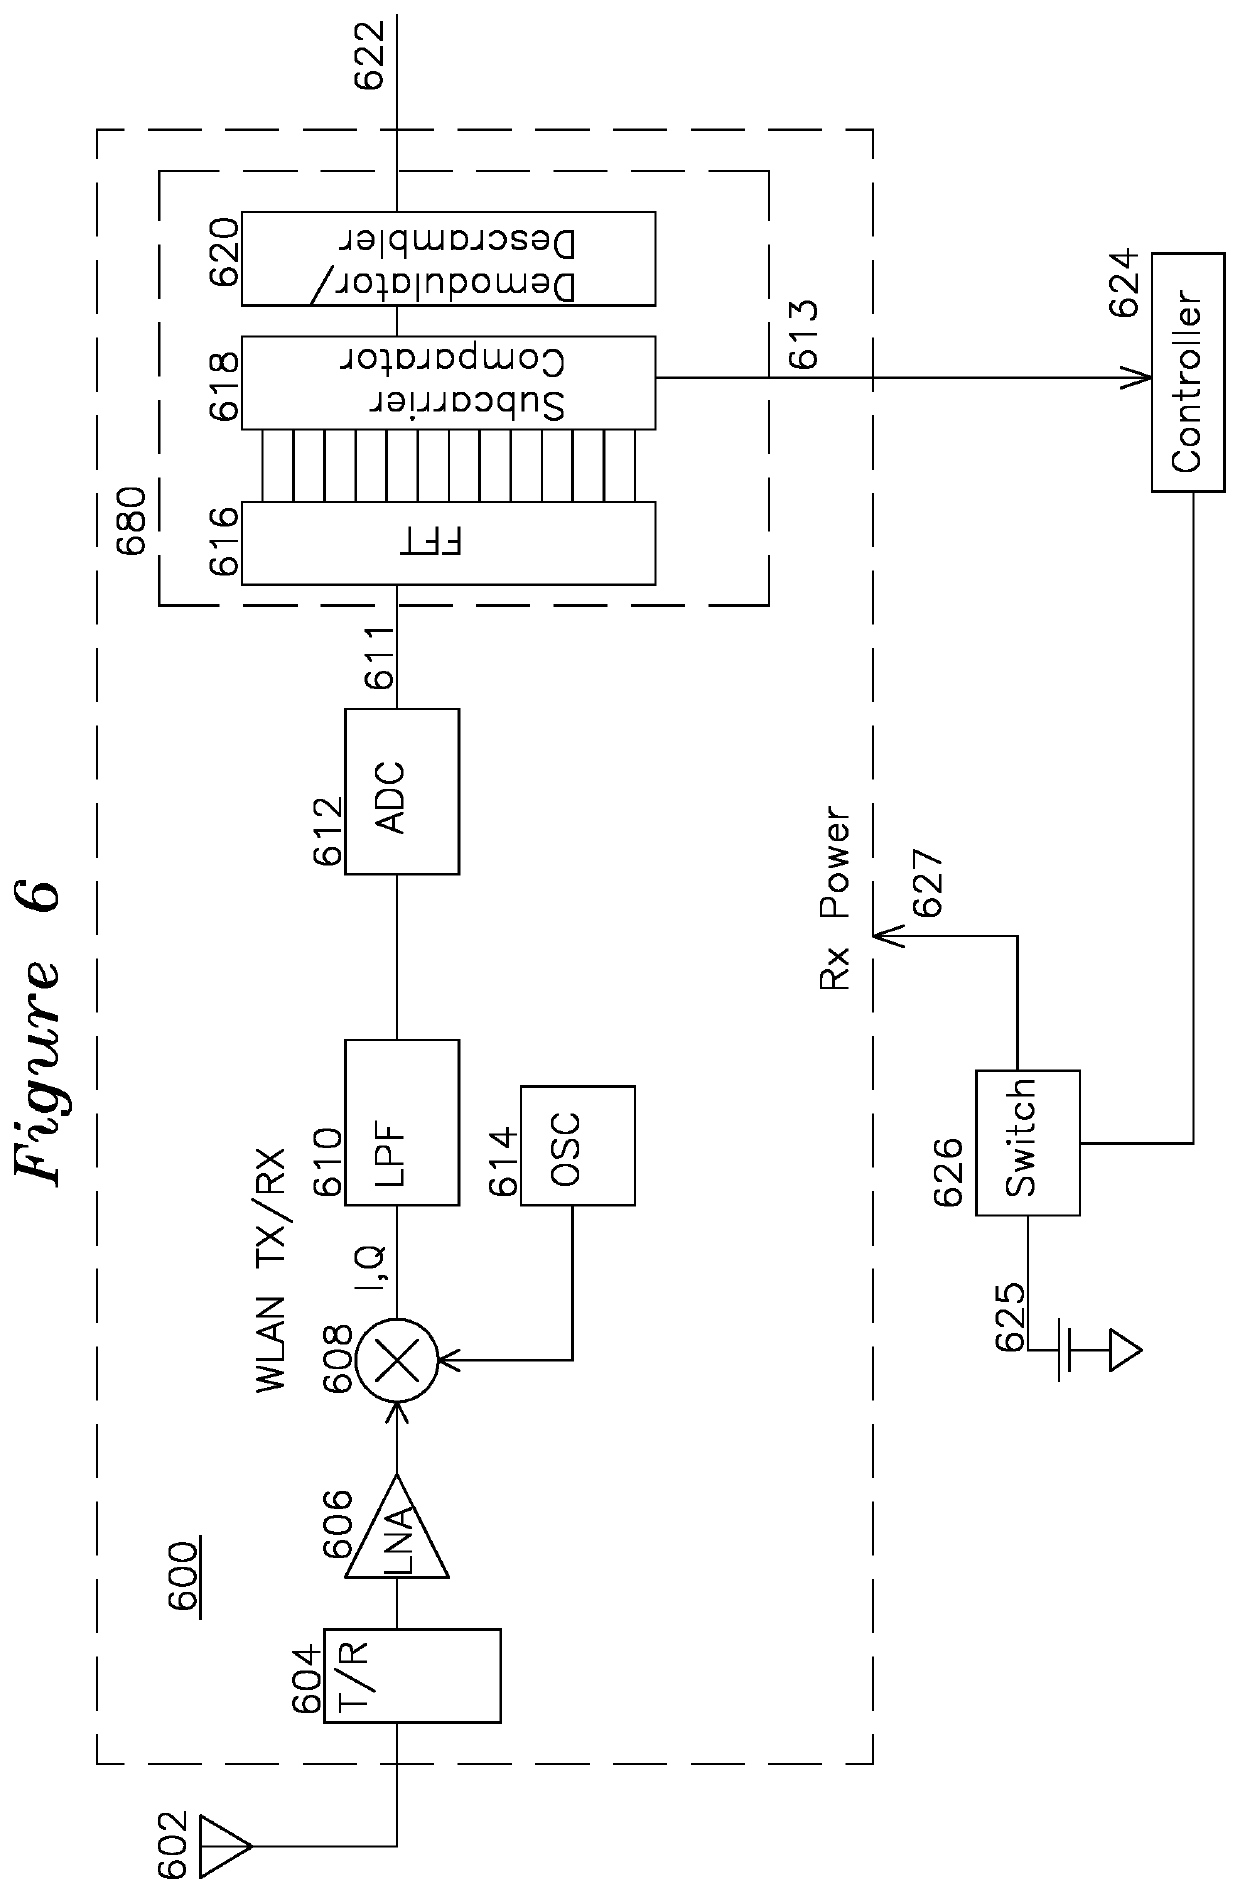 Same-Channel Interference Detection and Early Receiver Powerdown for OFDM Signal Processor